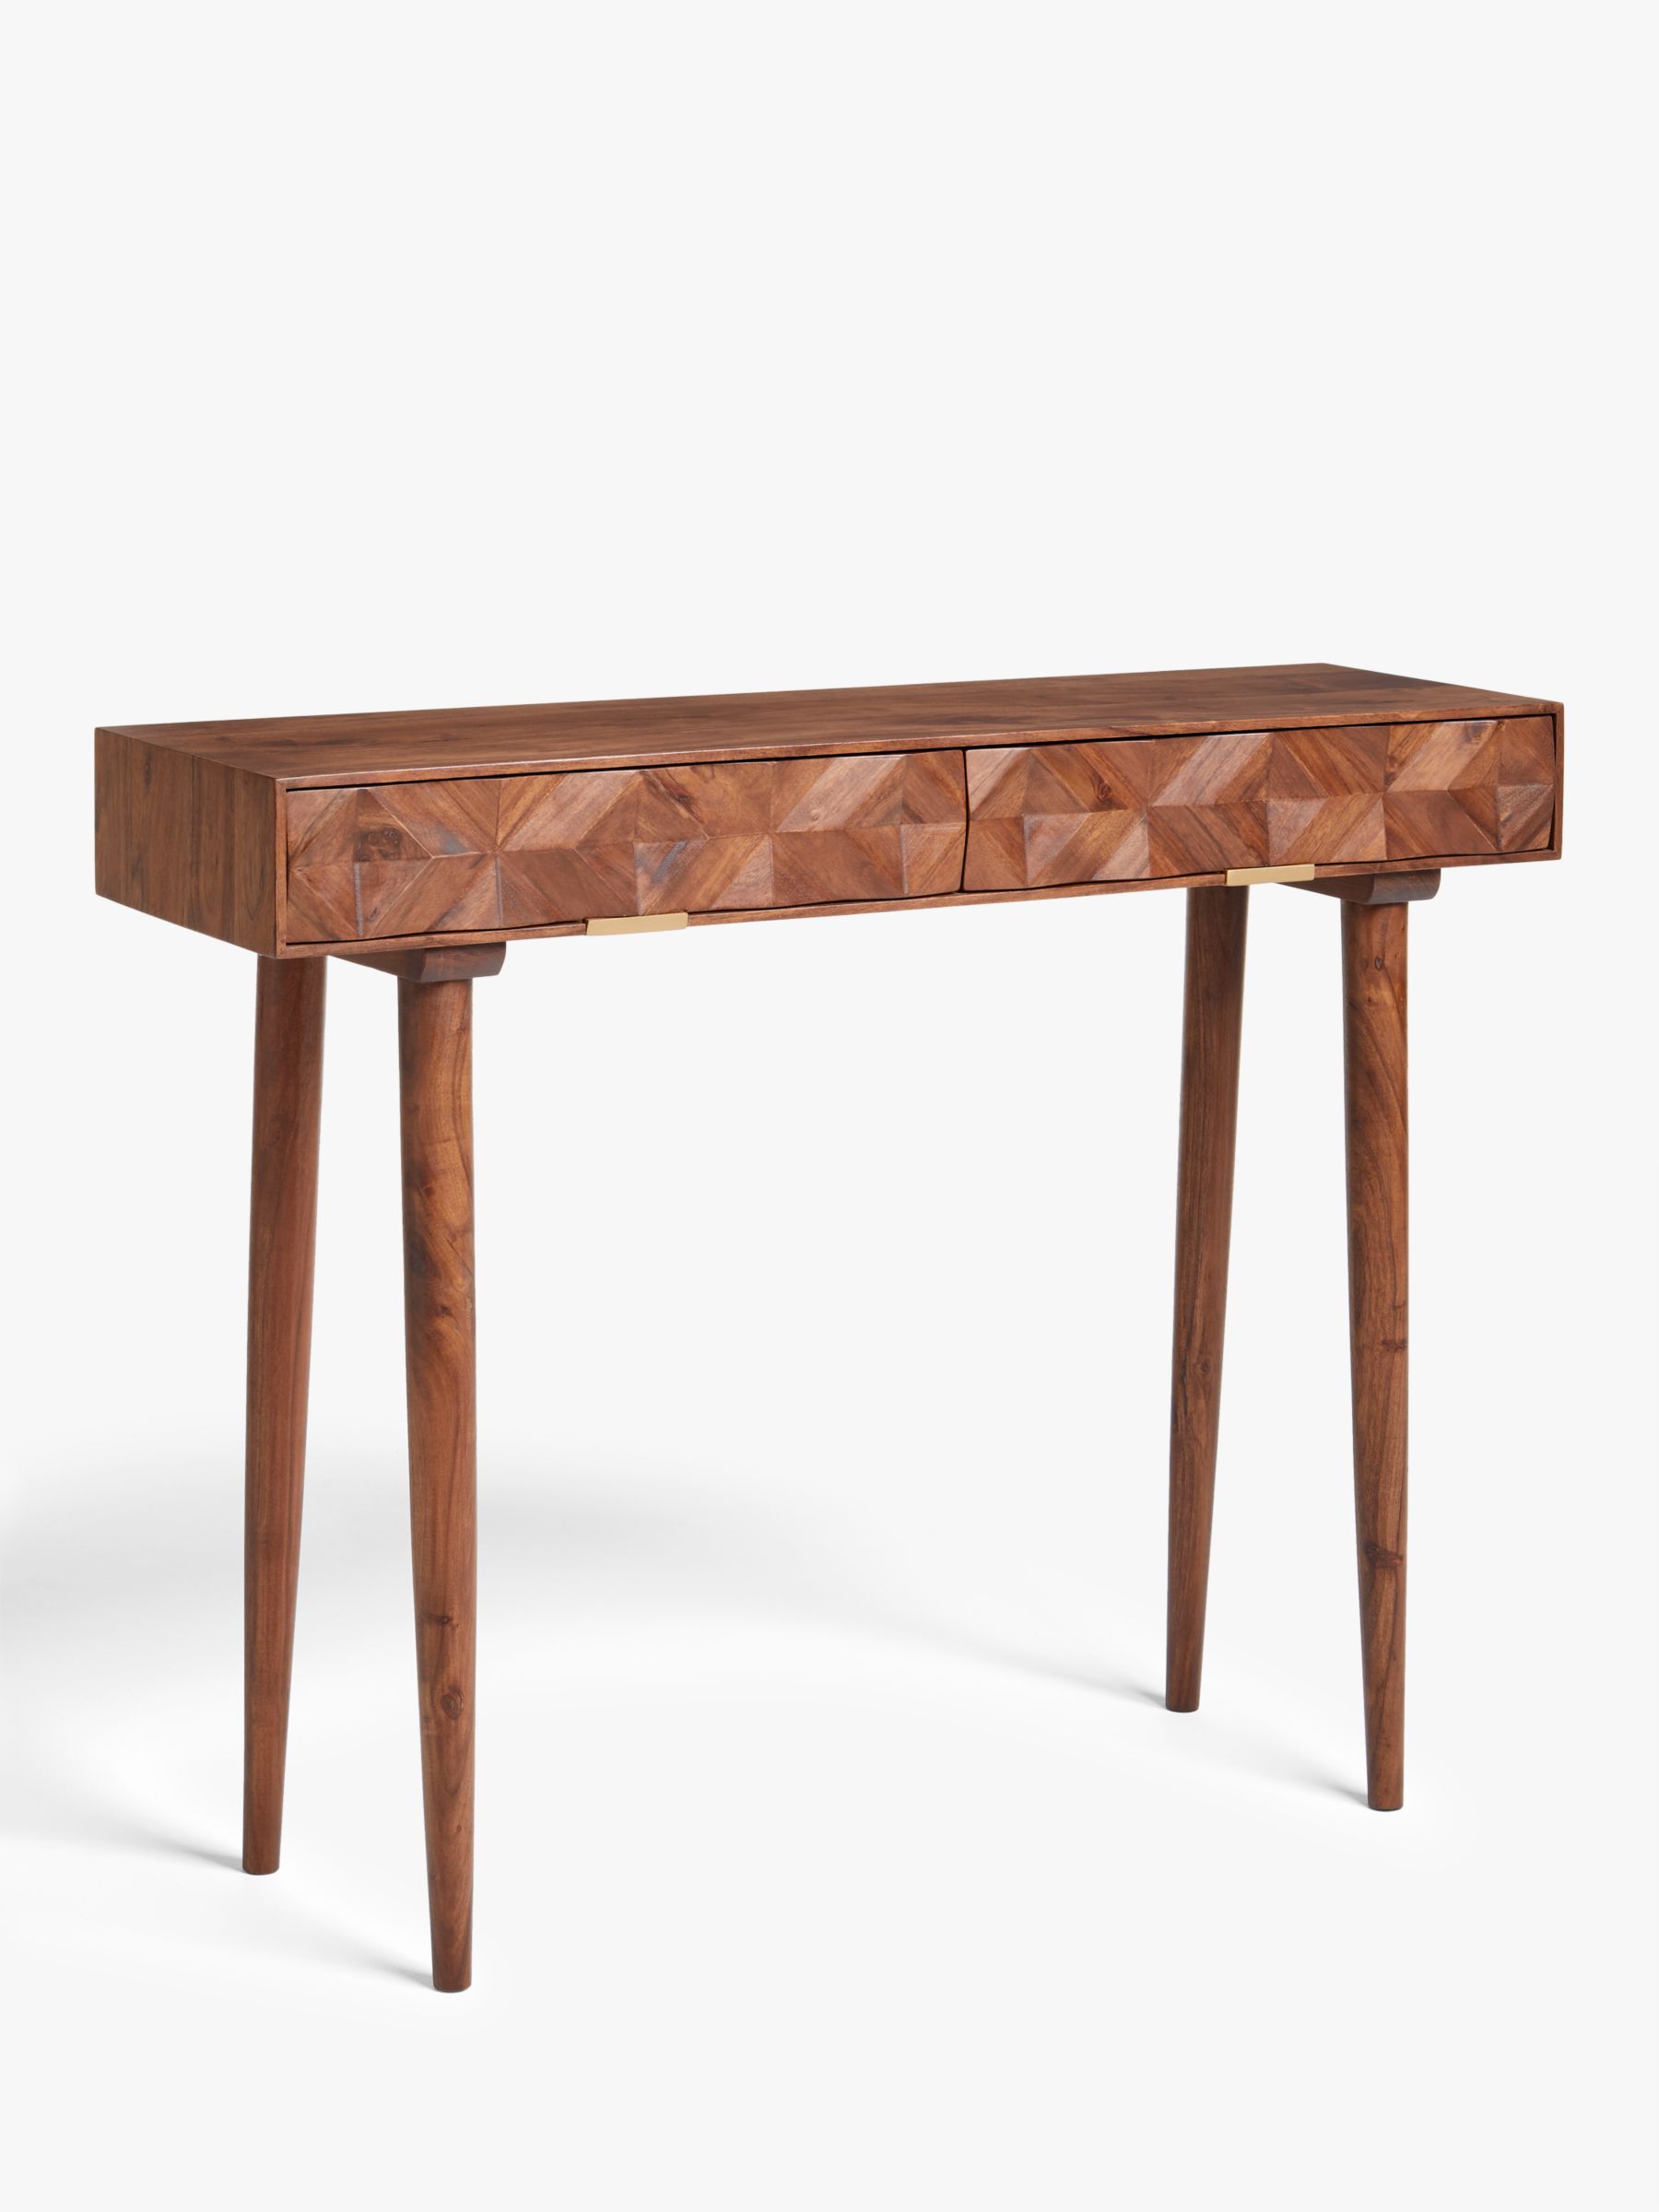 Photo of John lewis + swoon franklin console table